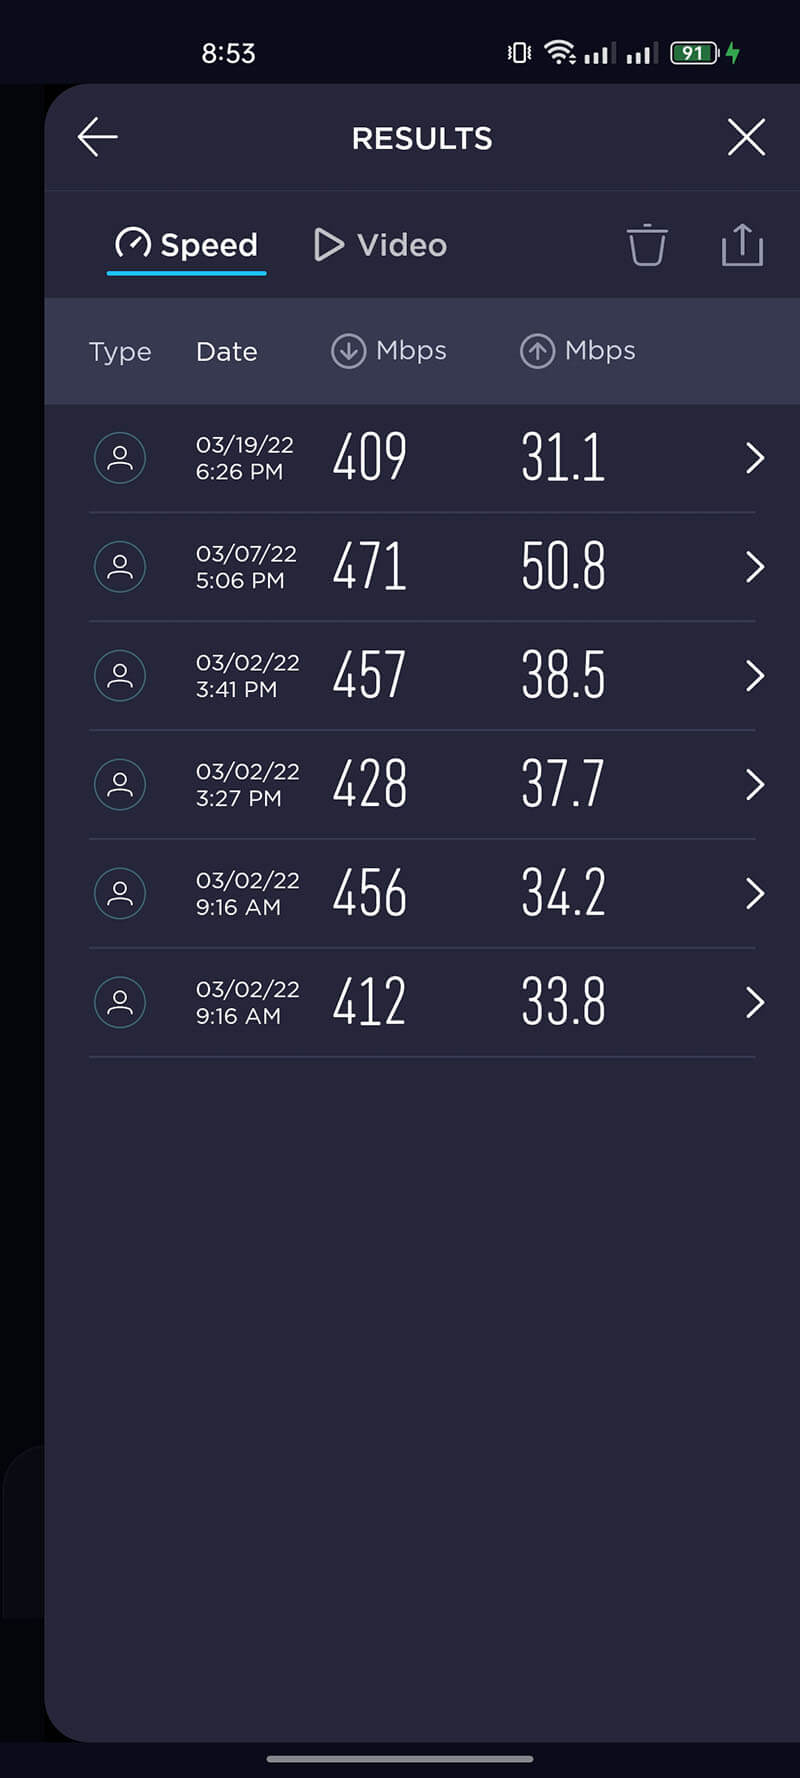 Speed test results